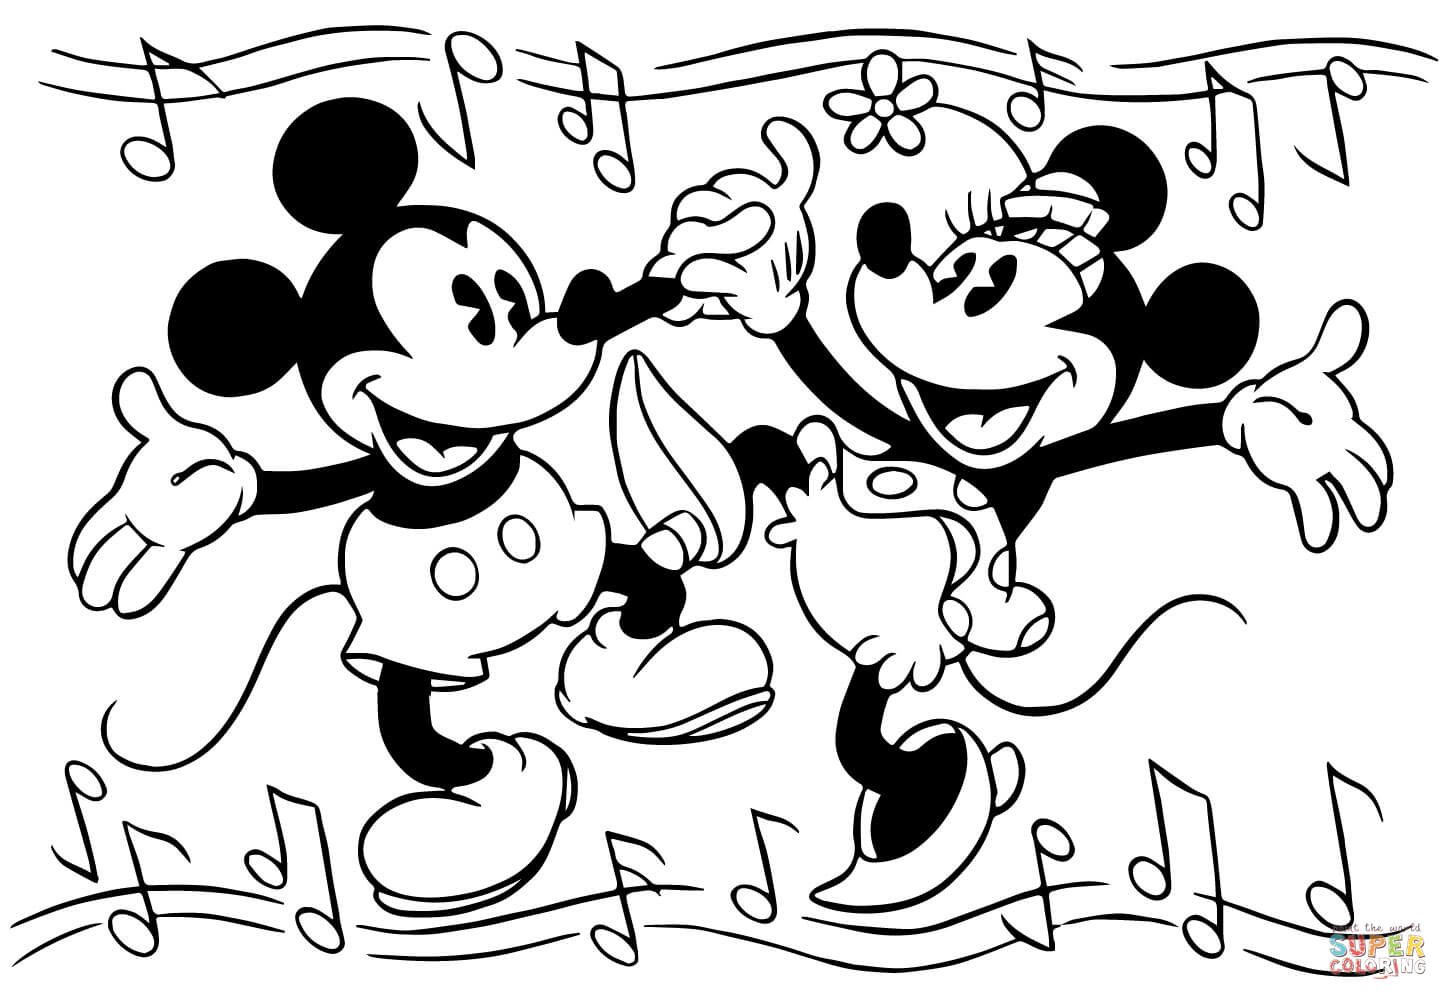 Minnie and mickey mouse are dancing coloring page free printable coloring pages